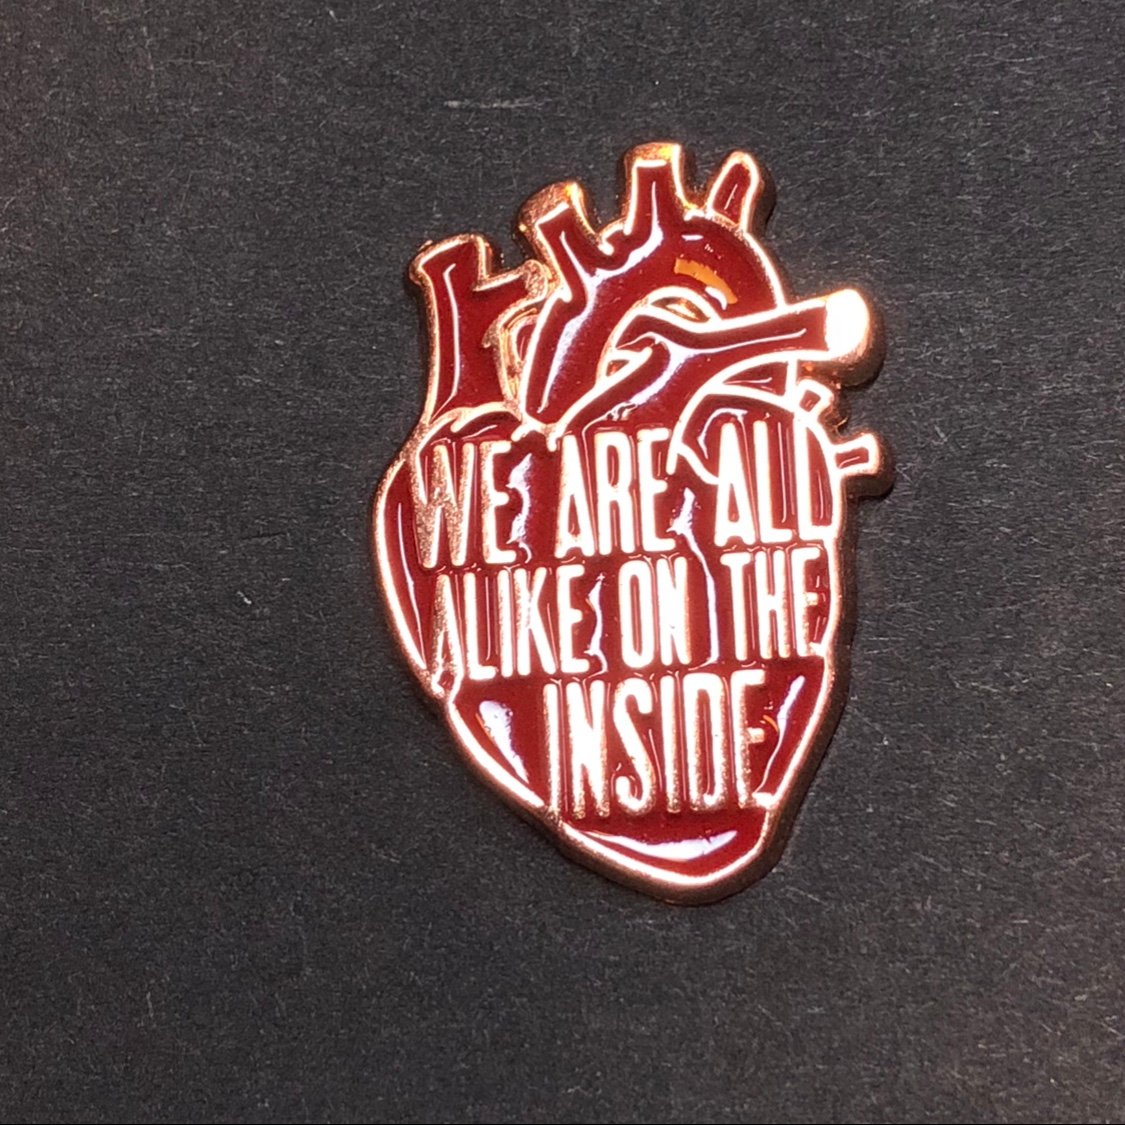 Image of We are all alike on the inside pin